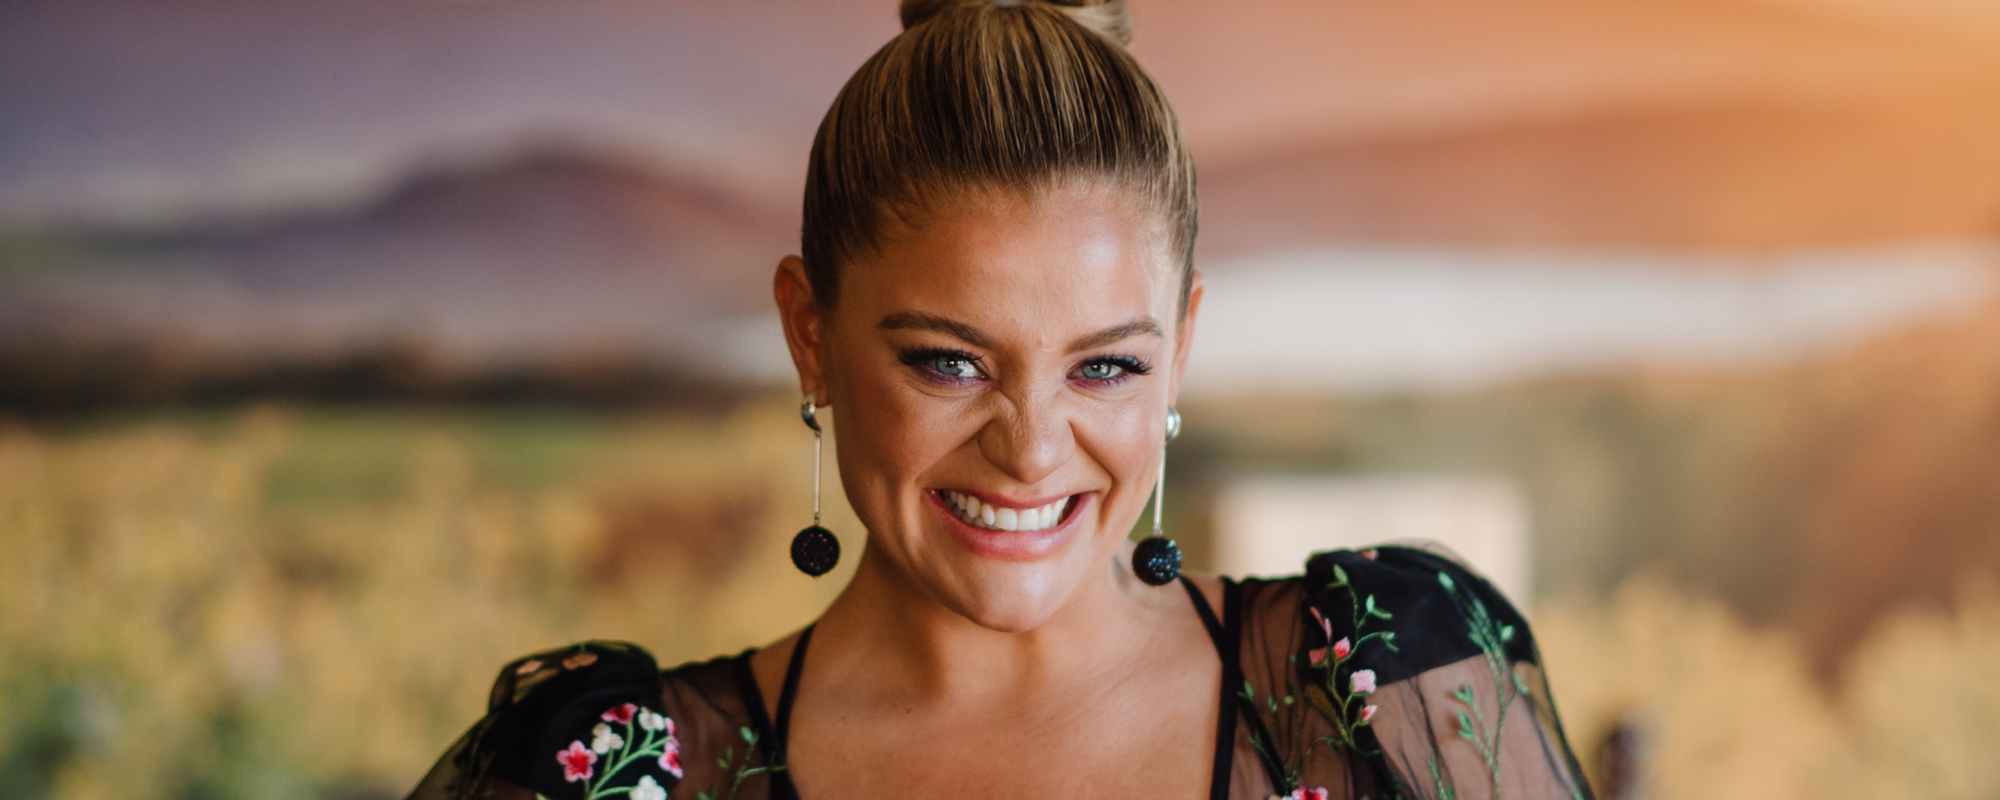 Lauren Alaina Talks New Music at Live In The Vineyard Goes Country: “It Represents Me As a Woman”